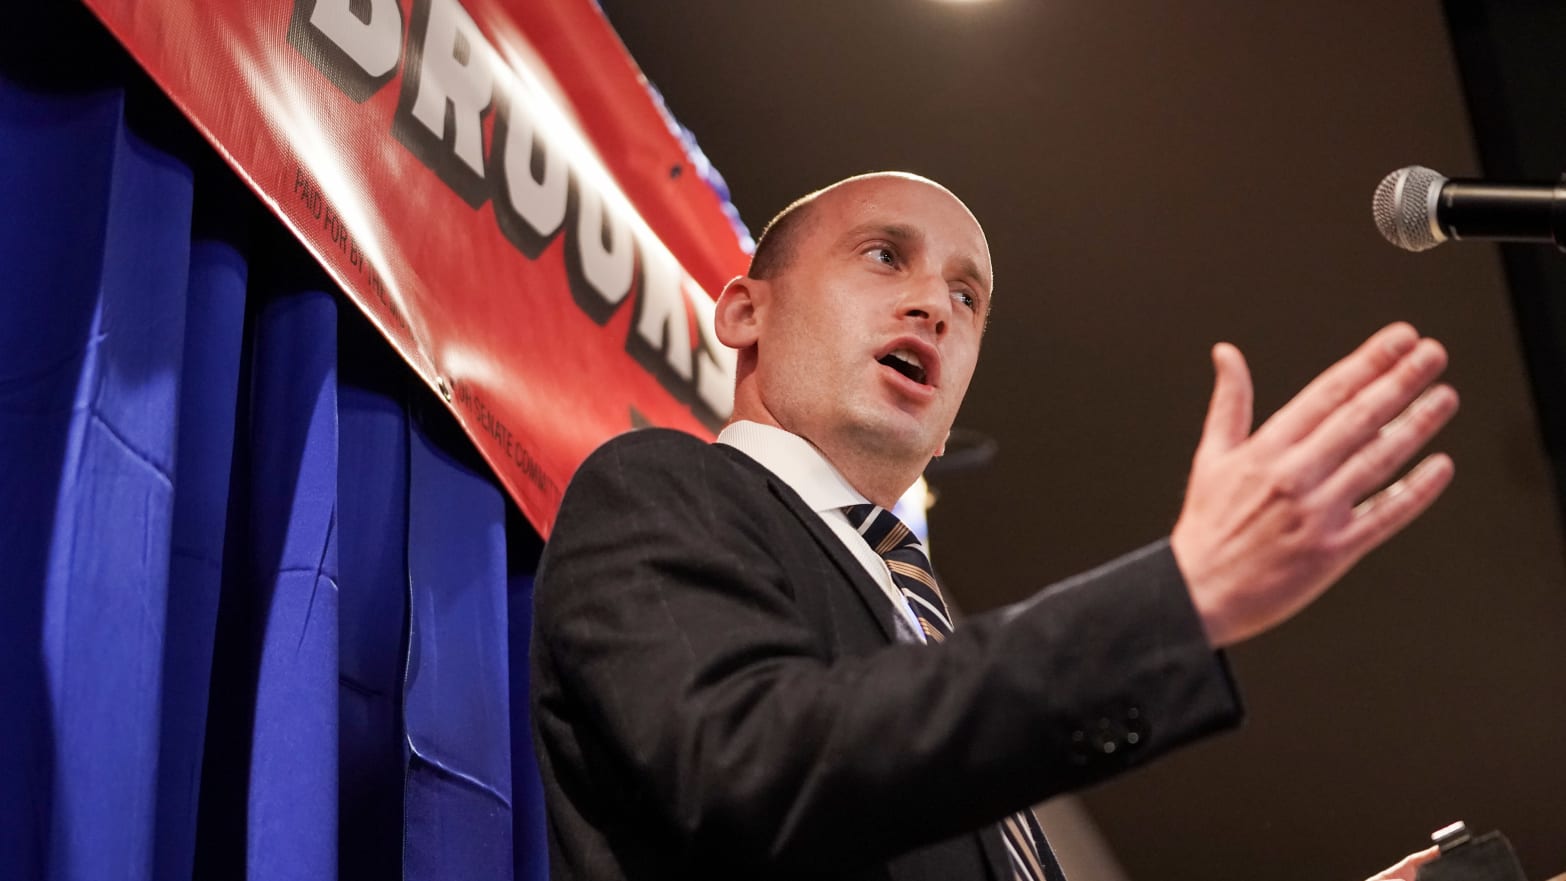 Former Trump adviser Stephen Miller speaks before U.S. Rep. Mo Brooks (R-AL) at a campaign rally